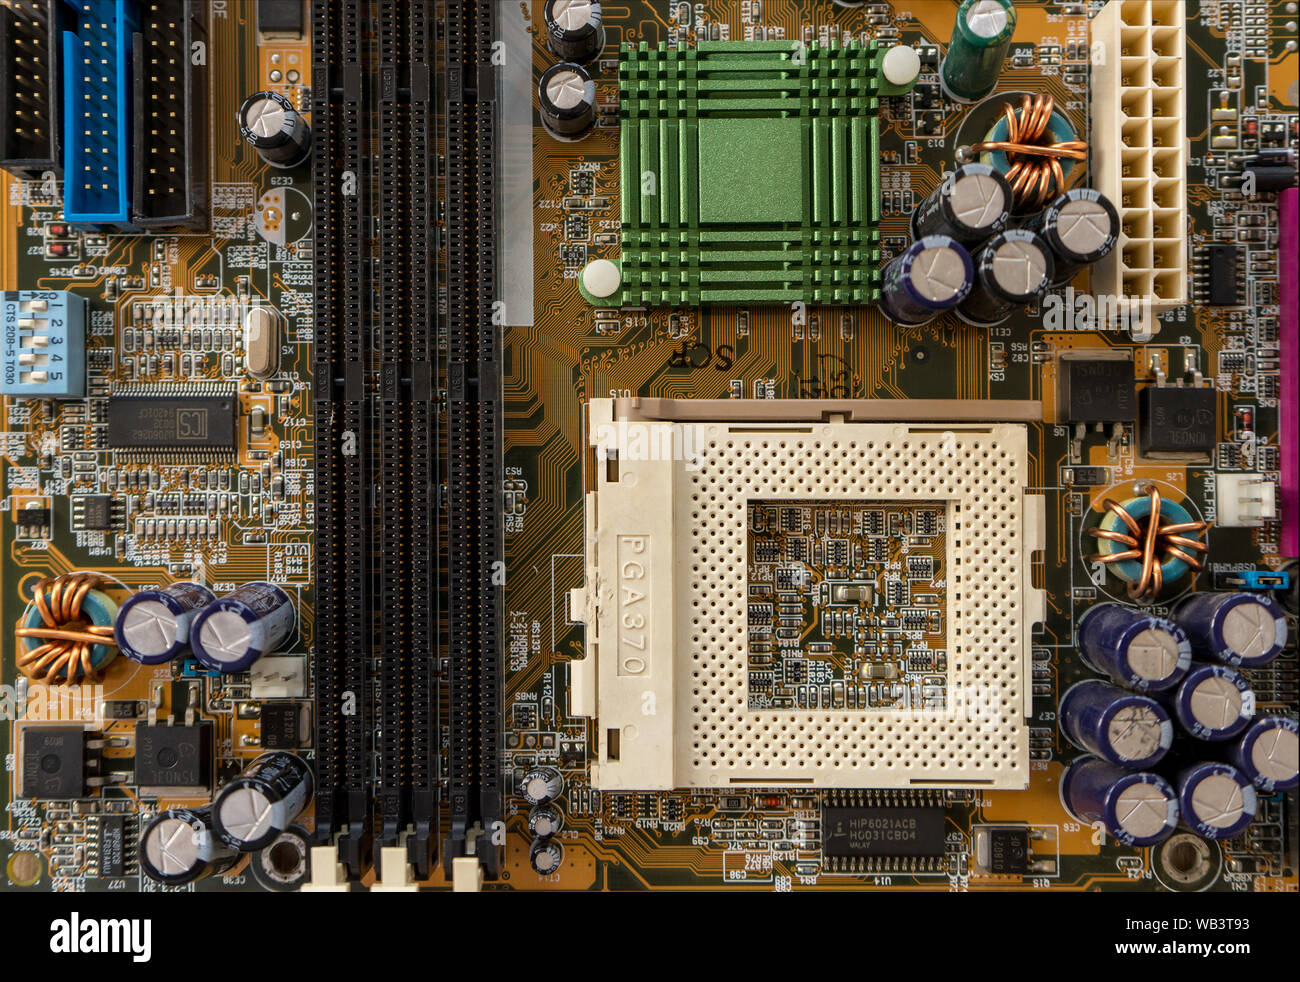 TIMISOARA, ROMANIA - DECEMBER 02, 2018: Close-up of an ASUS motherboard on a wooden table. CPU socket 370. Top view. Stock Photo